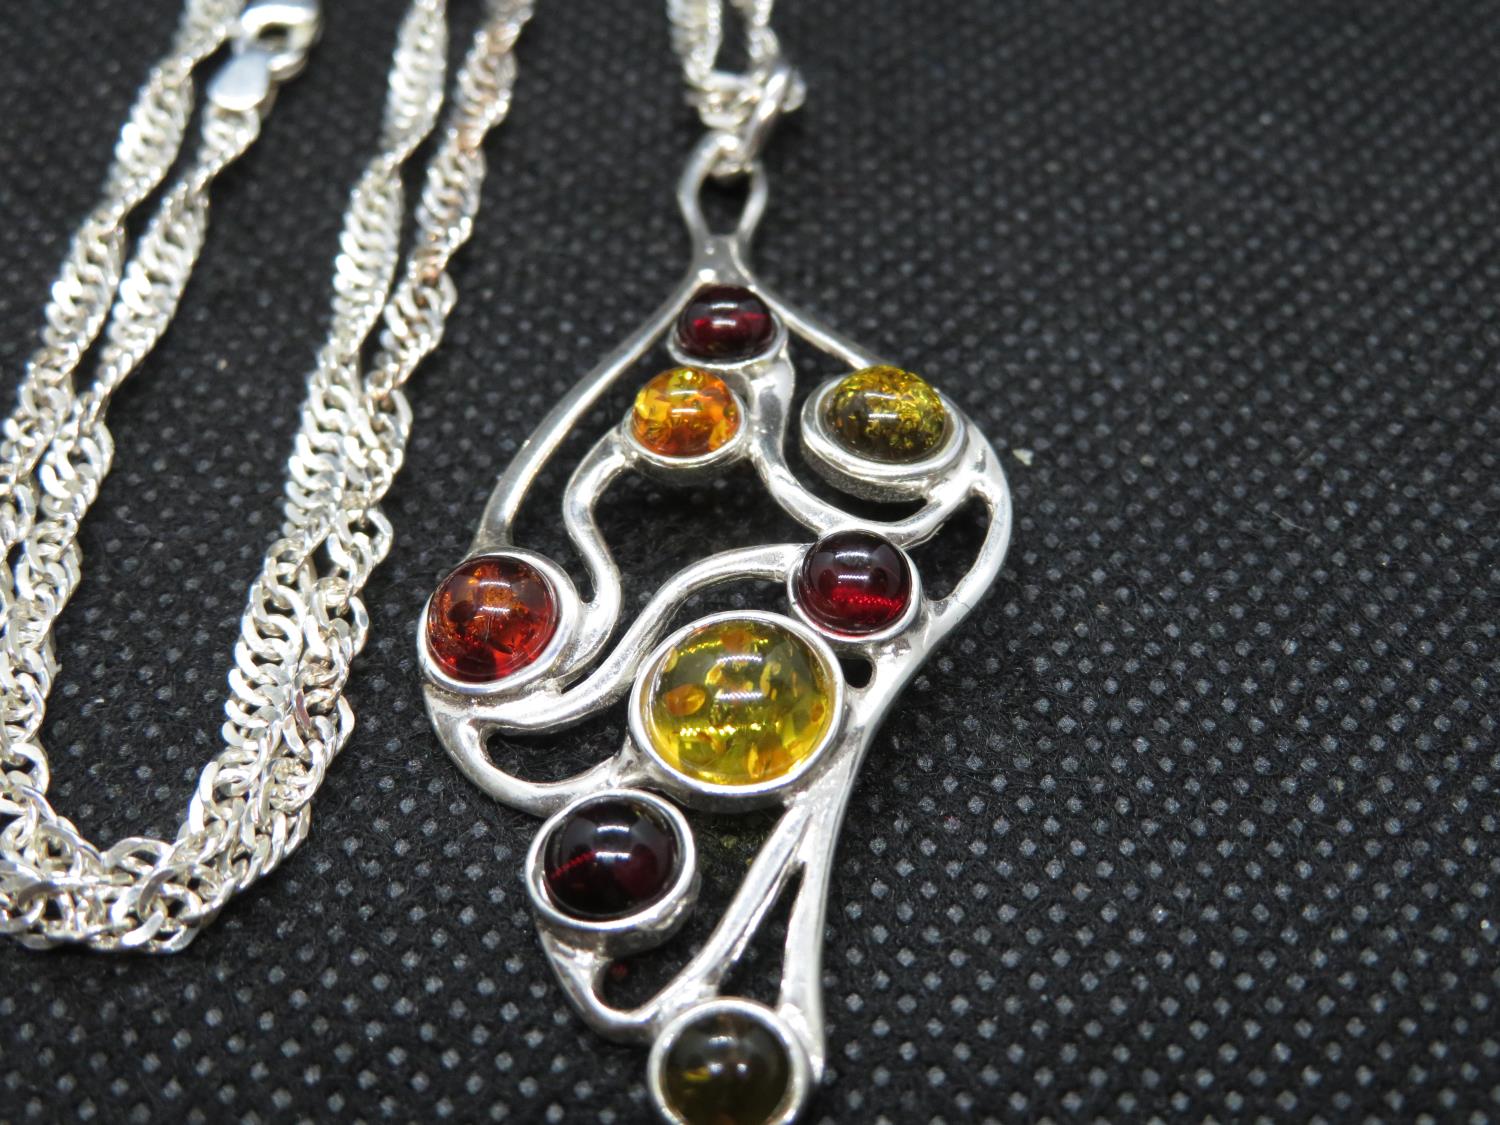 Modernist silver pendant set with Baltic Amber on 24" silver curb link chain 13.8g - Image 2 of 2